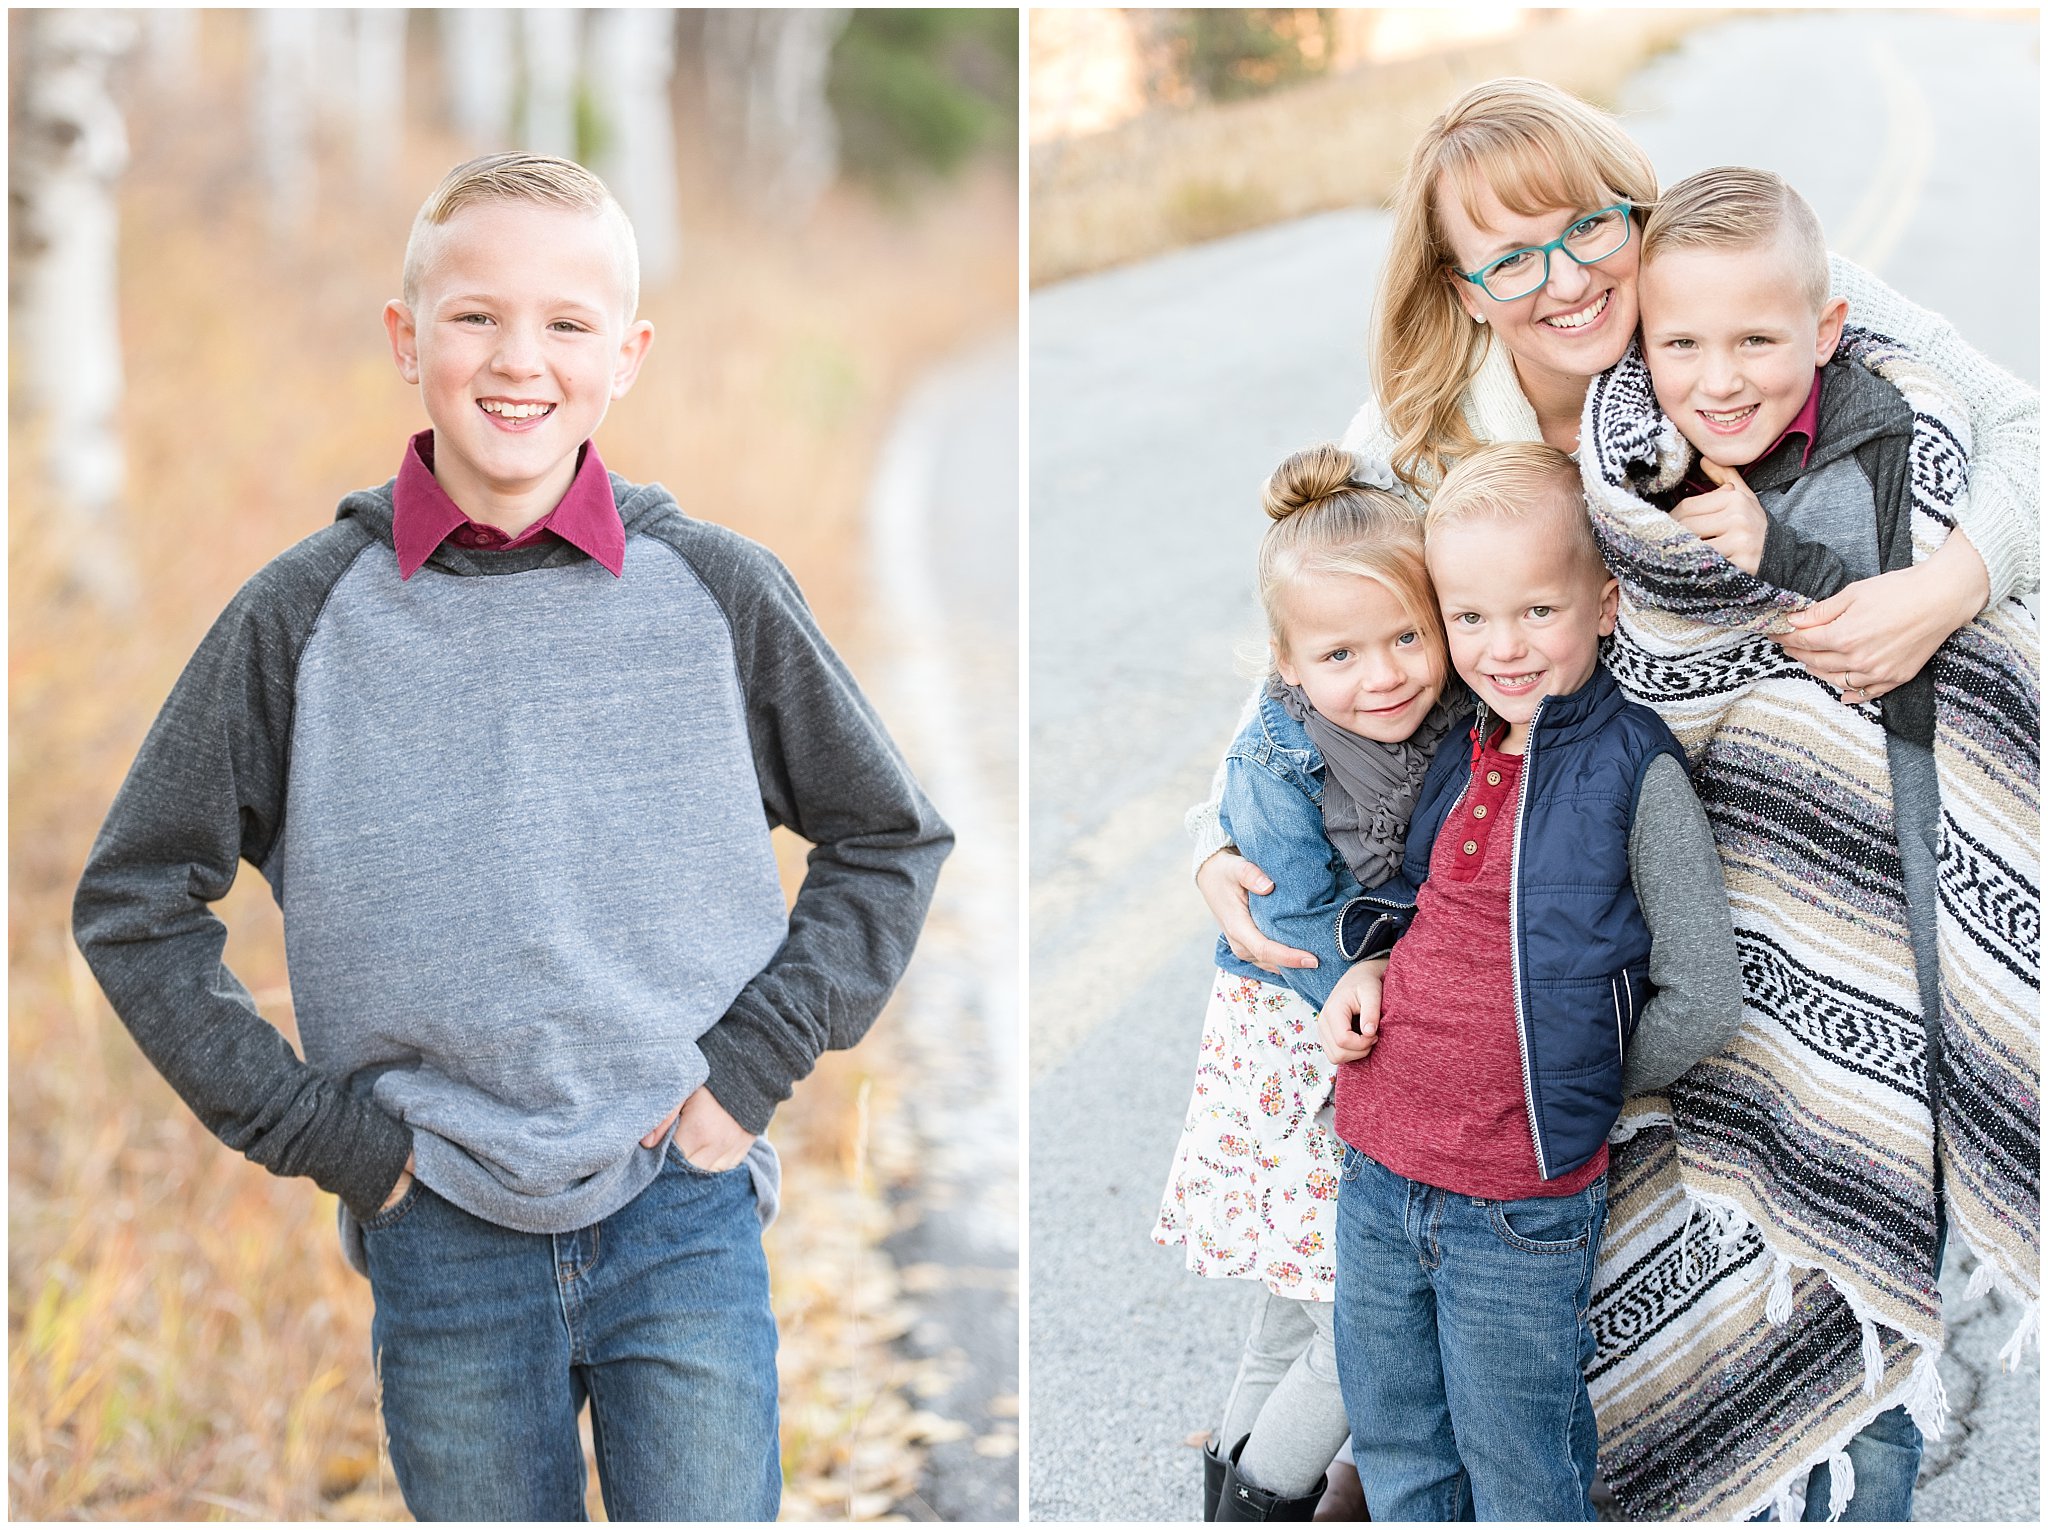 Candid portrait and picture of boy in fall leaves | Fall Family Pictures in the Mountains | Snowbasin, Utah | Jessie and Dallin Photography